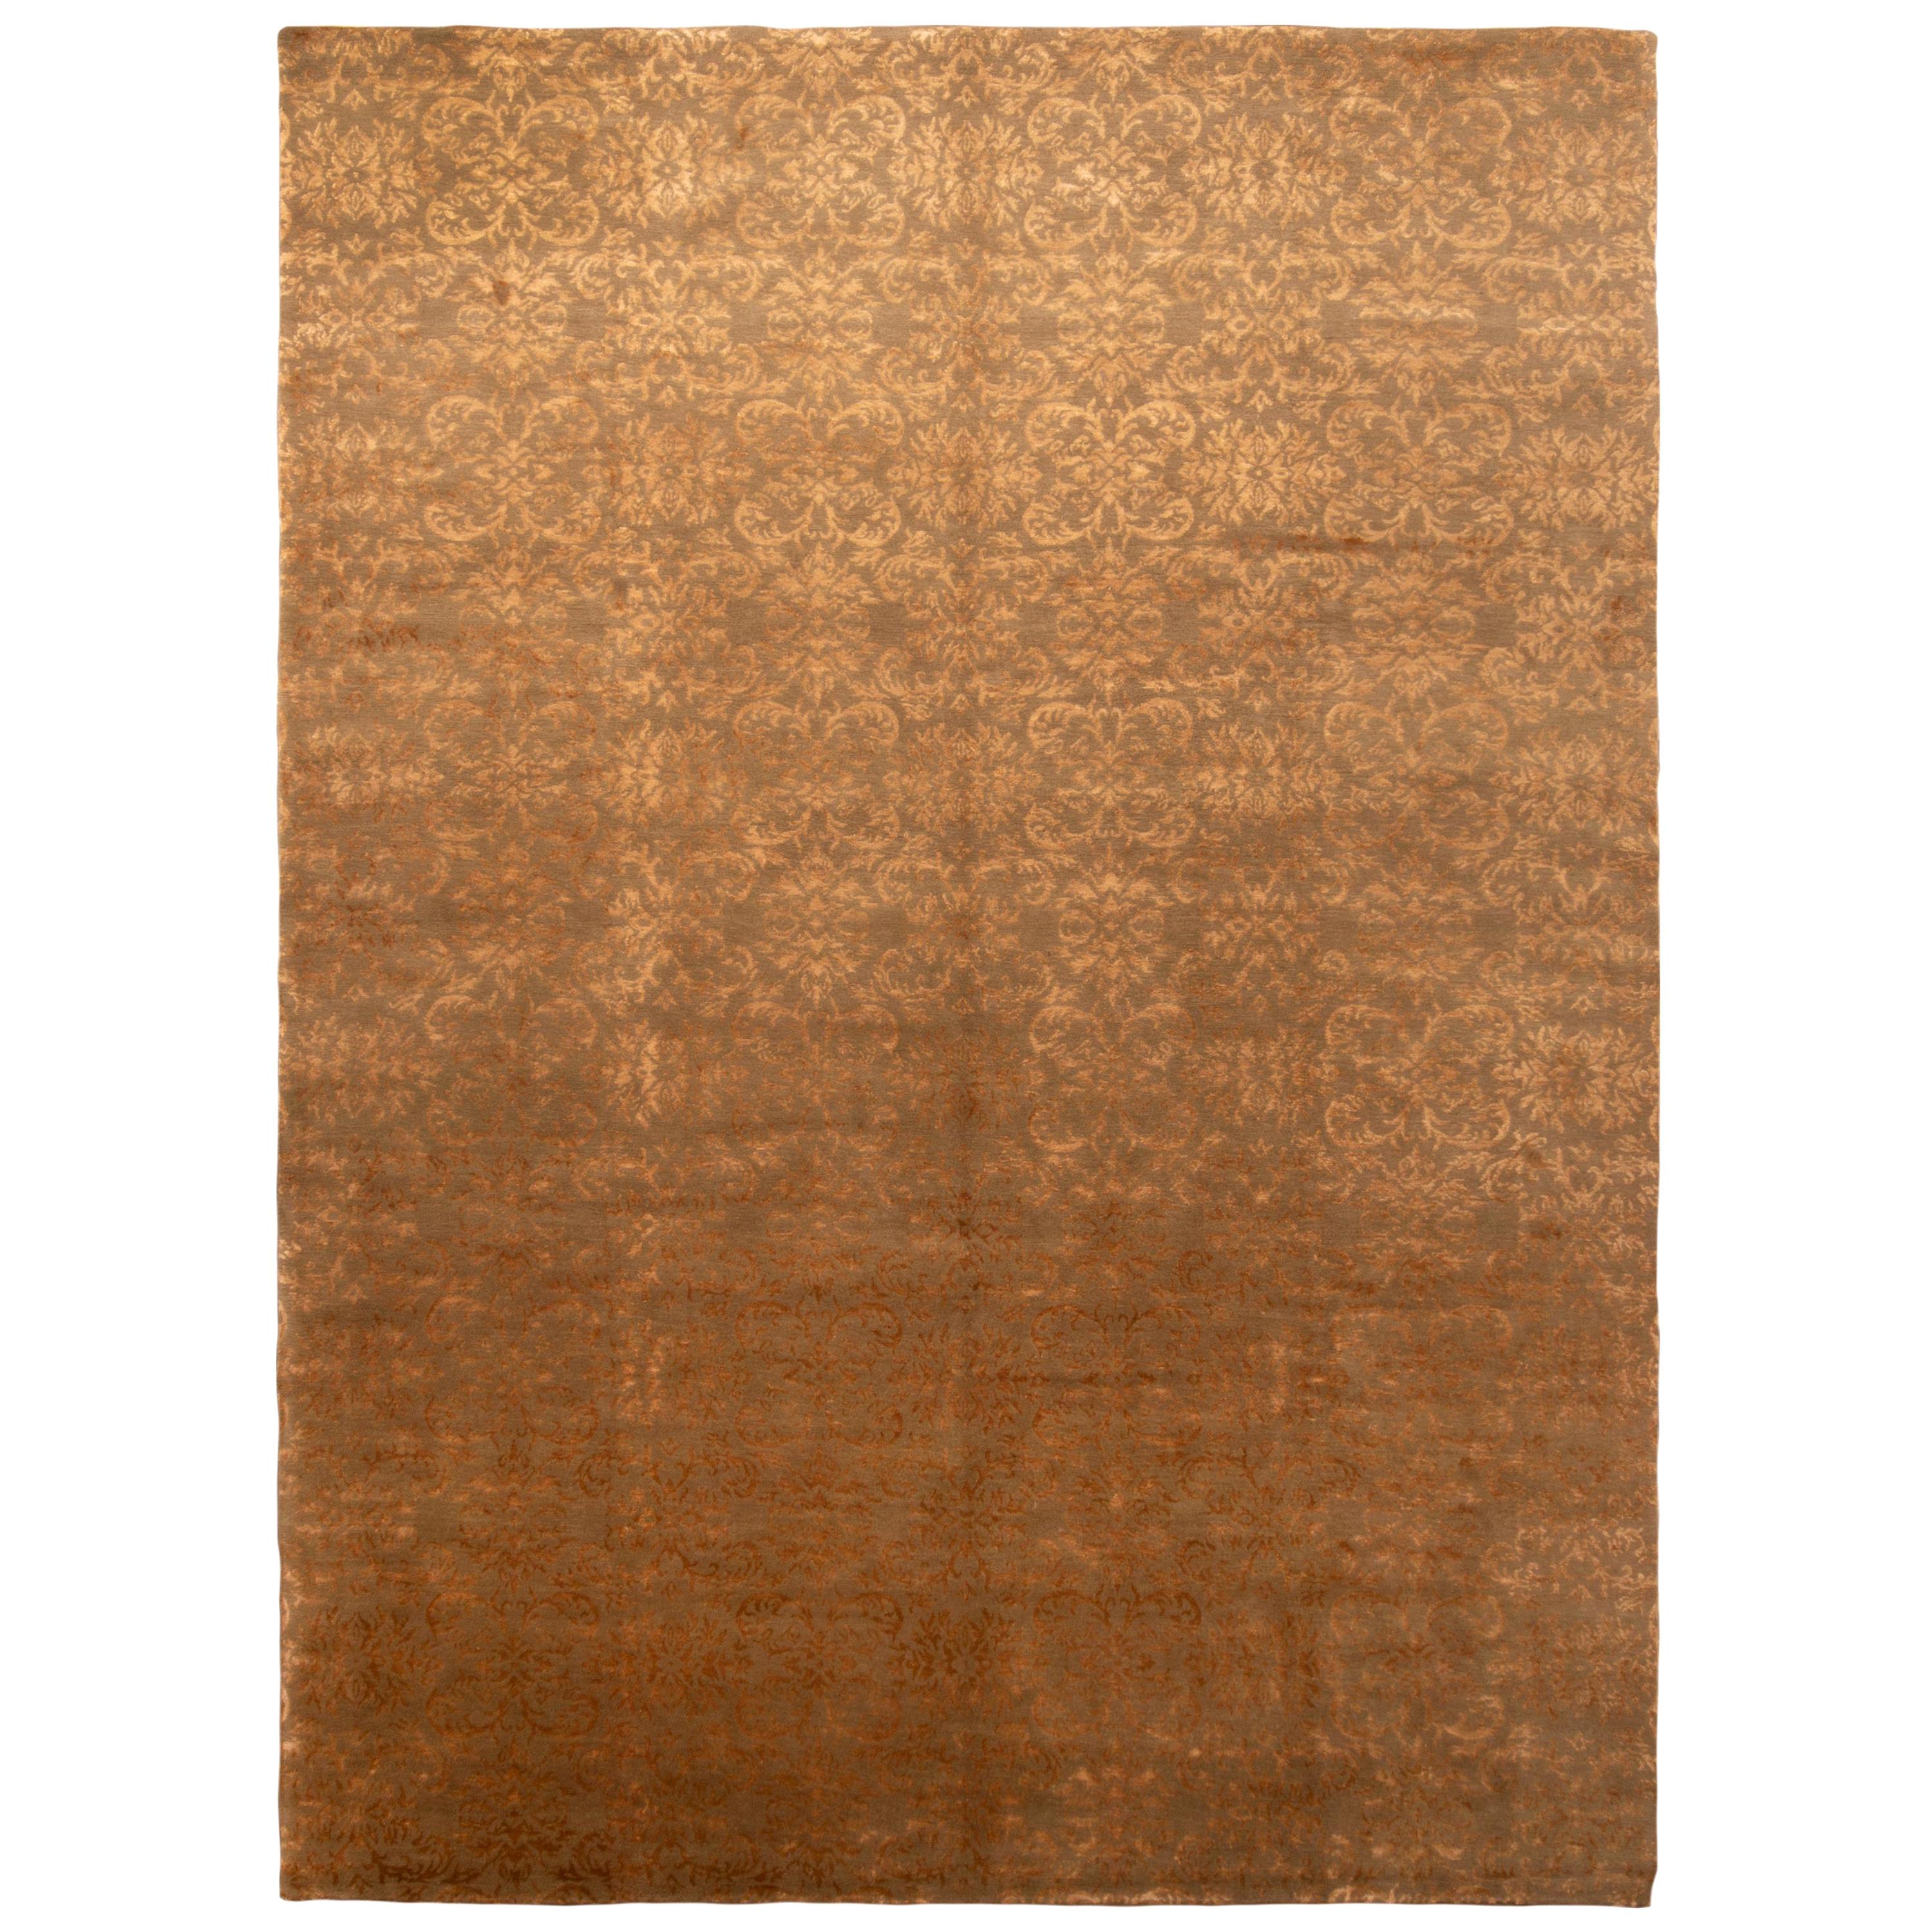 Rug & Kilim's New Arabesque Gold and Brown Wool and Silk Rug